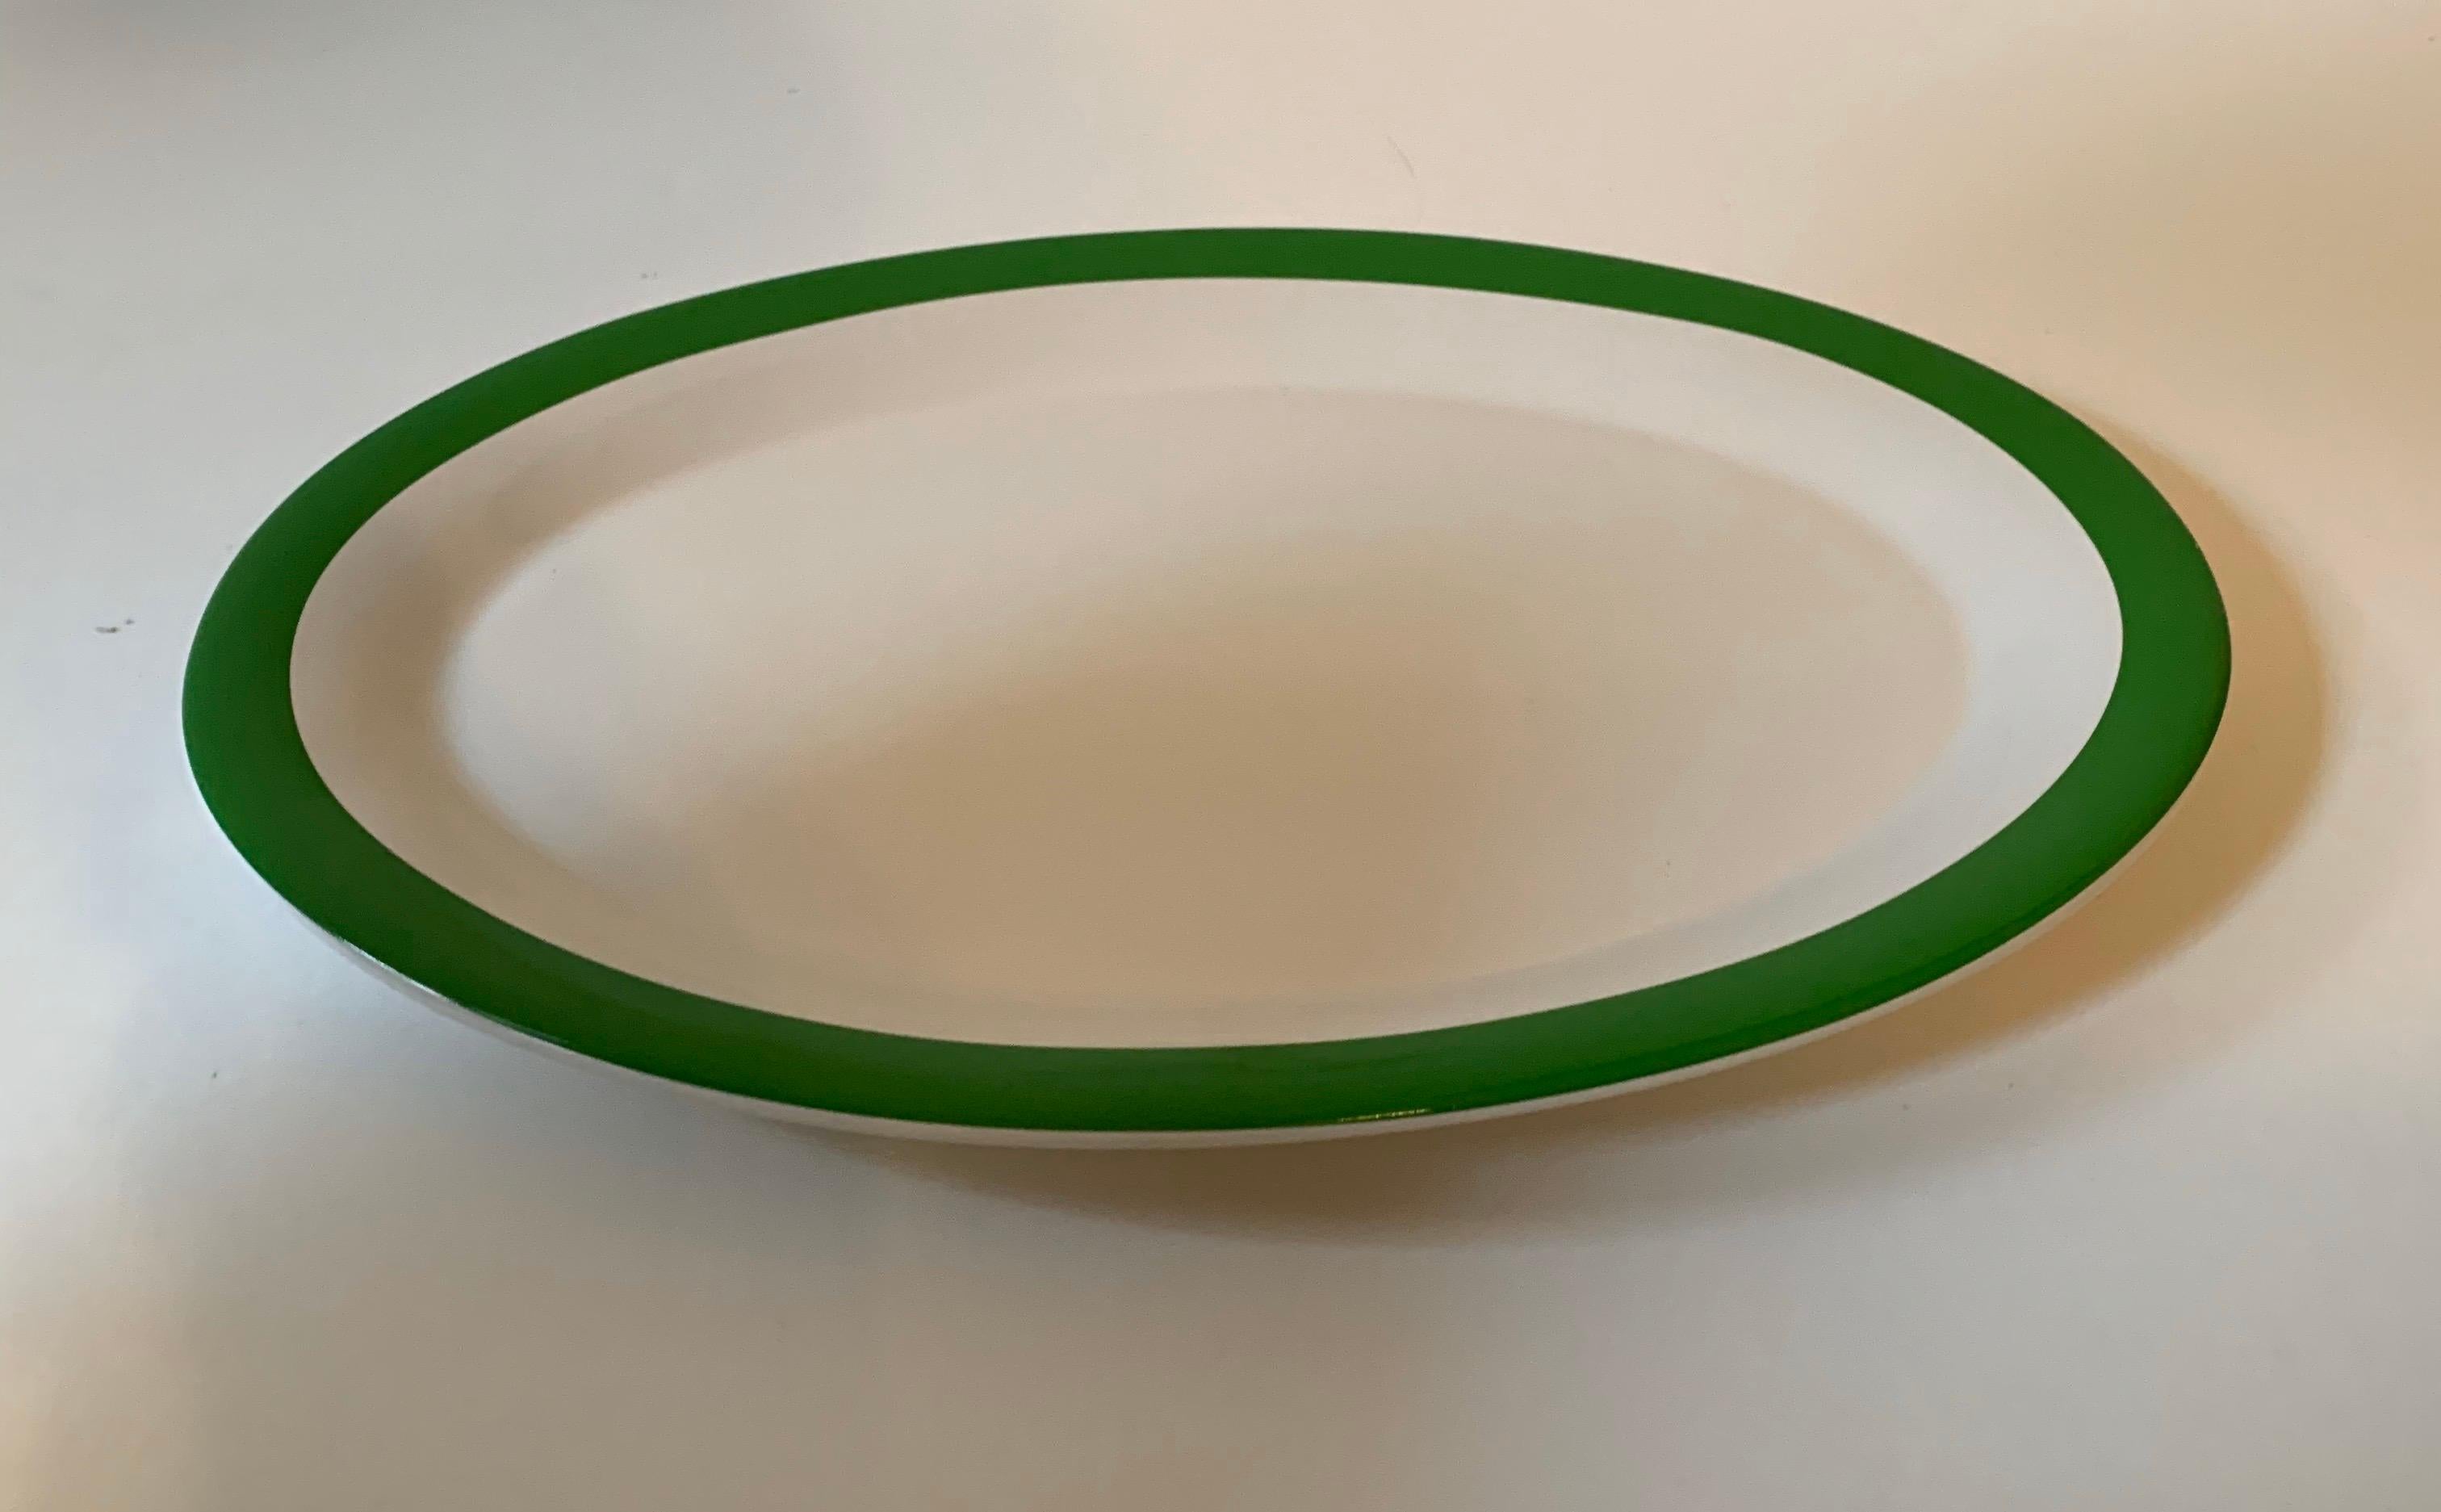 Kate Spade New York bone china oval serving dish in the Rutherford Circle Green pattern by Lenox.

Green border on white.

Size: 14.25 inches L x 10.5 inches W.
 